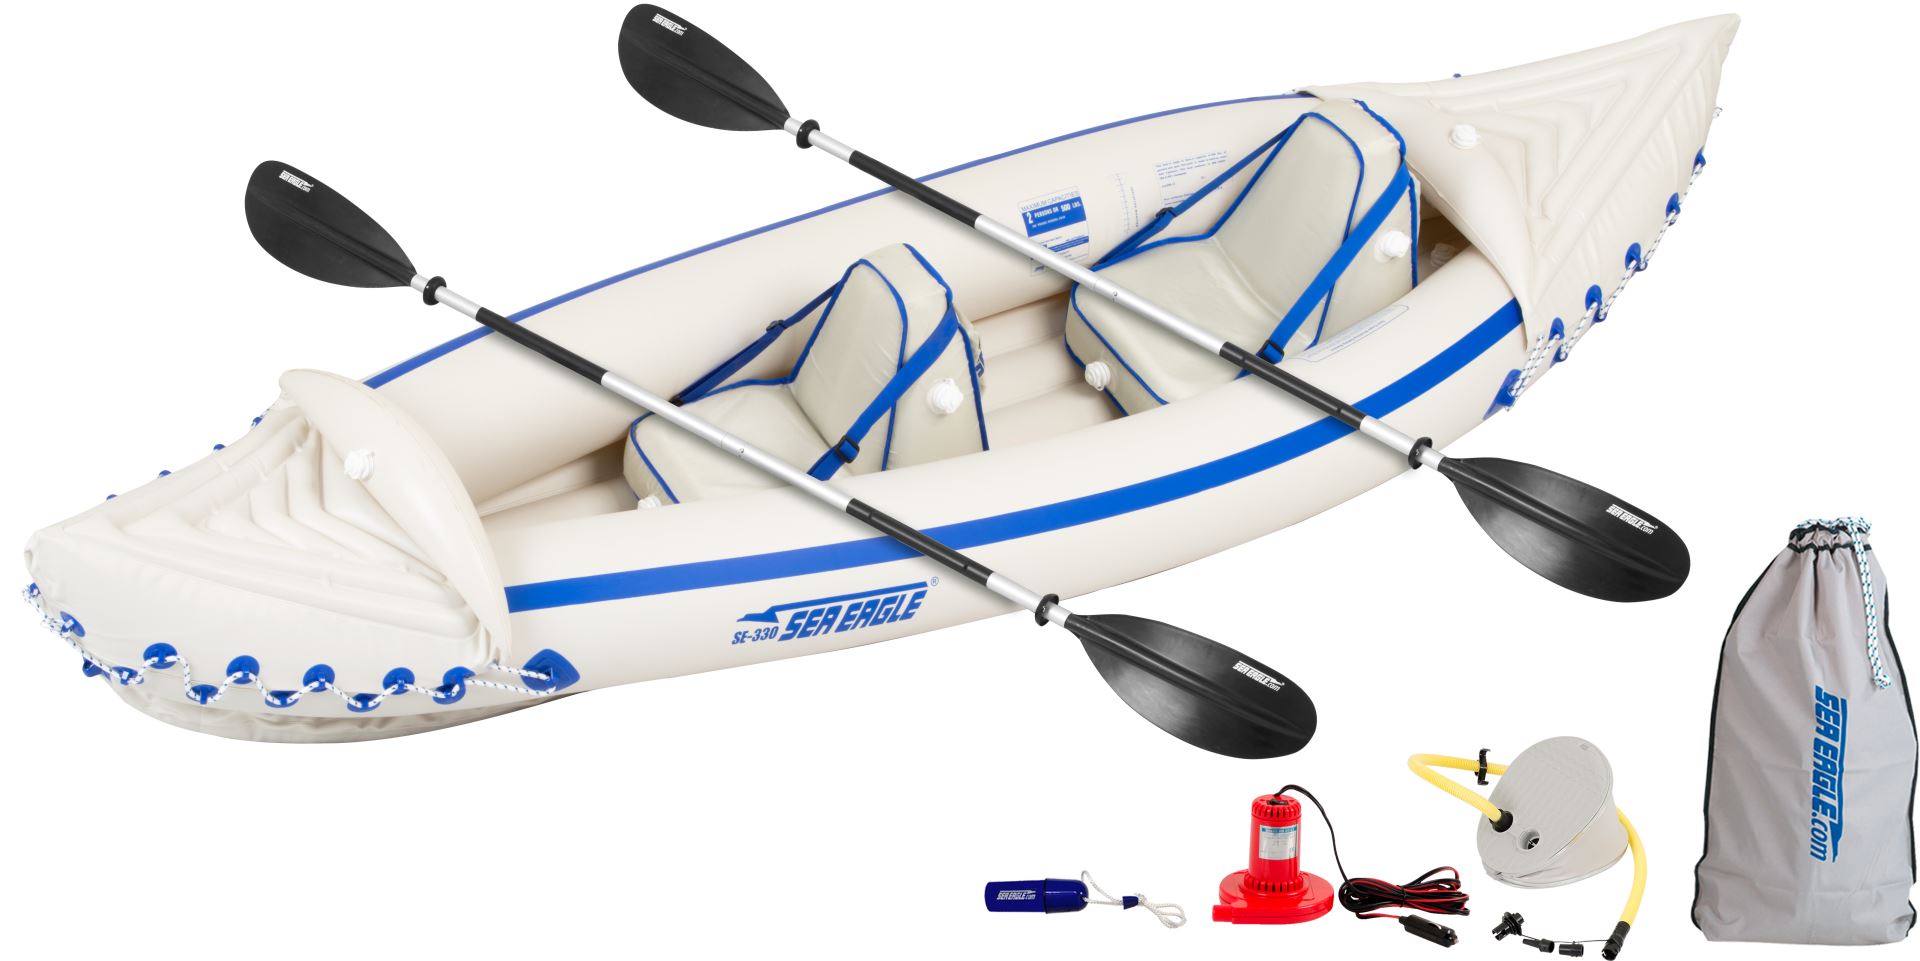 used 2 person kayak, used 2 person kayak Suppliers and Manufacturers at